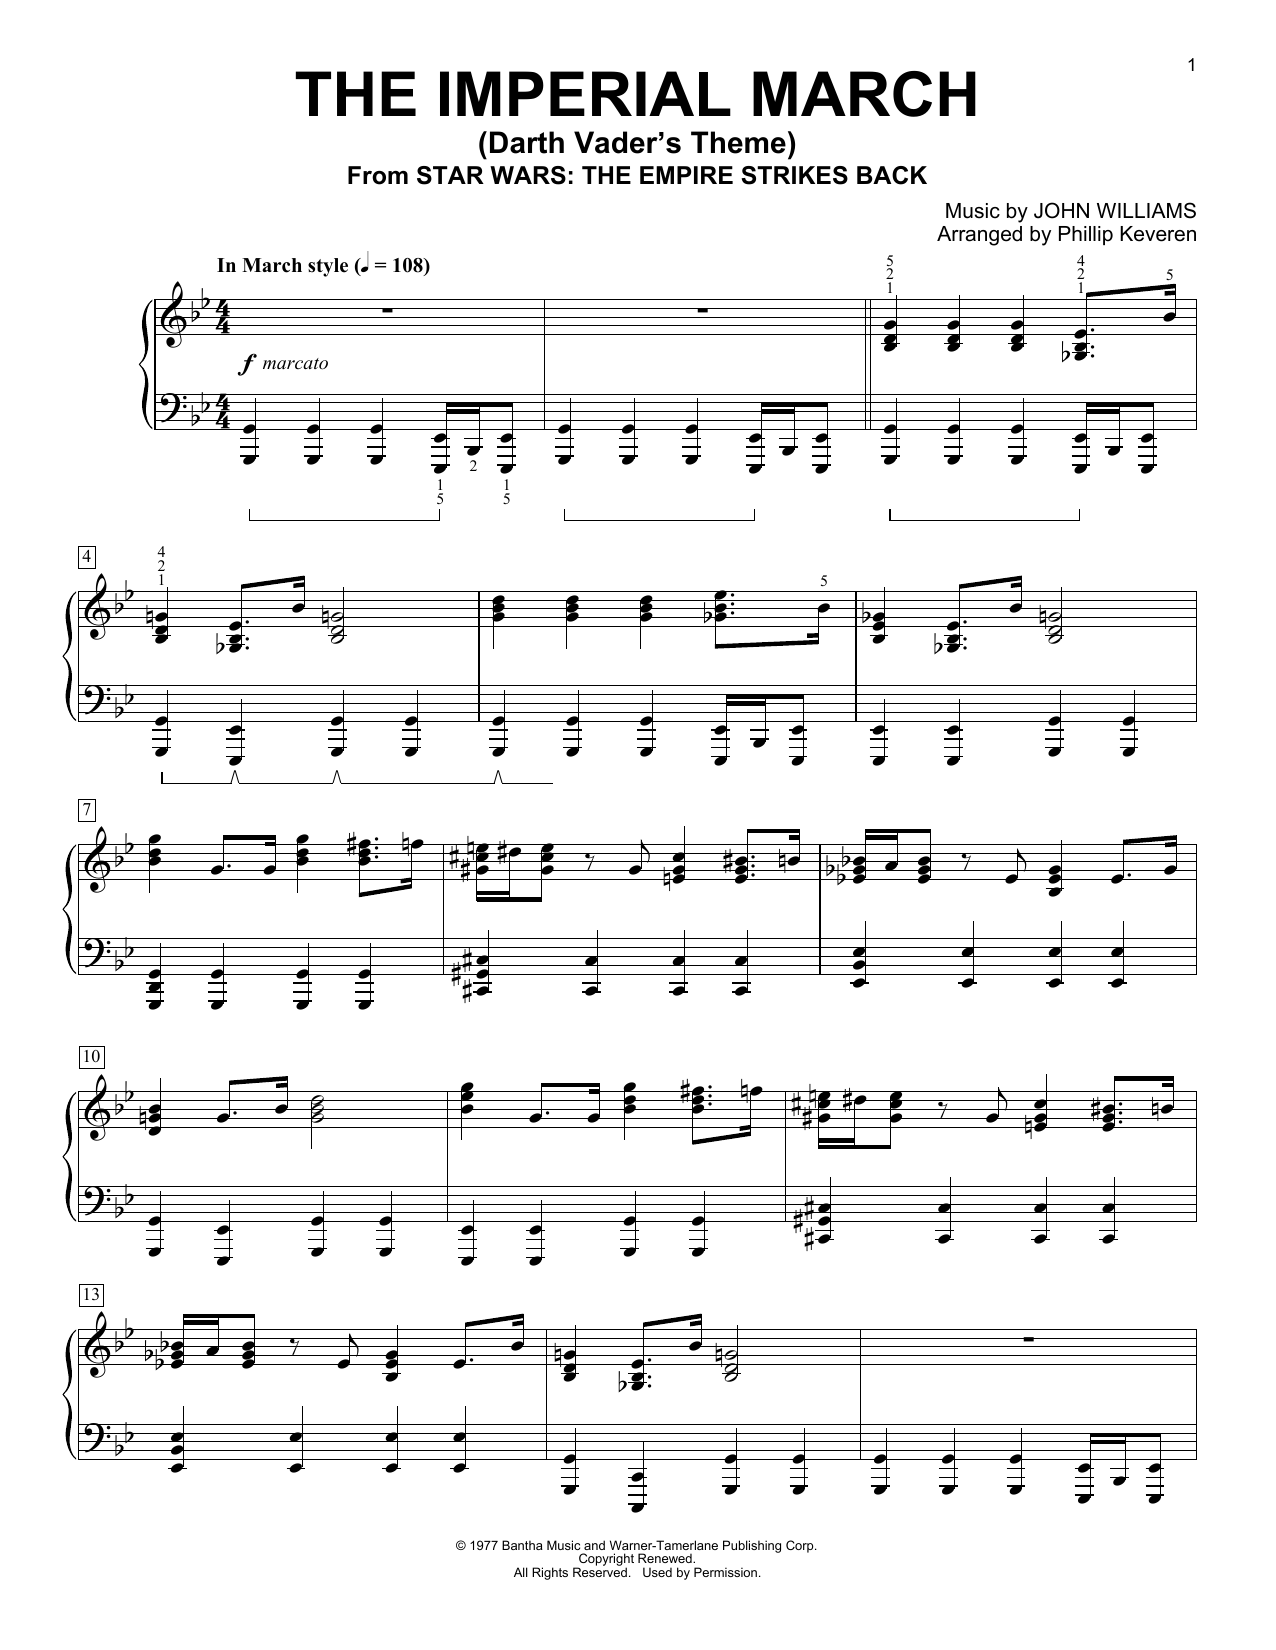 Download Phillip Keveren The Imperial March (Darth Vader's Theme Sheet Music